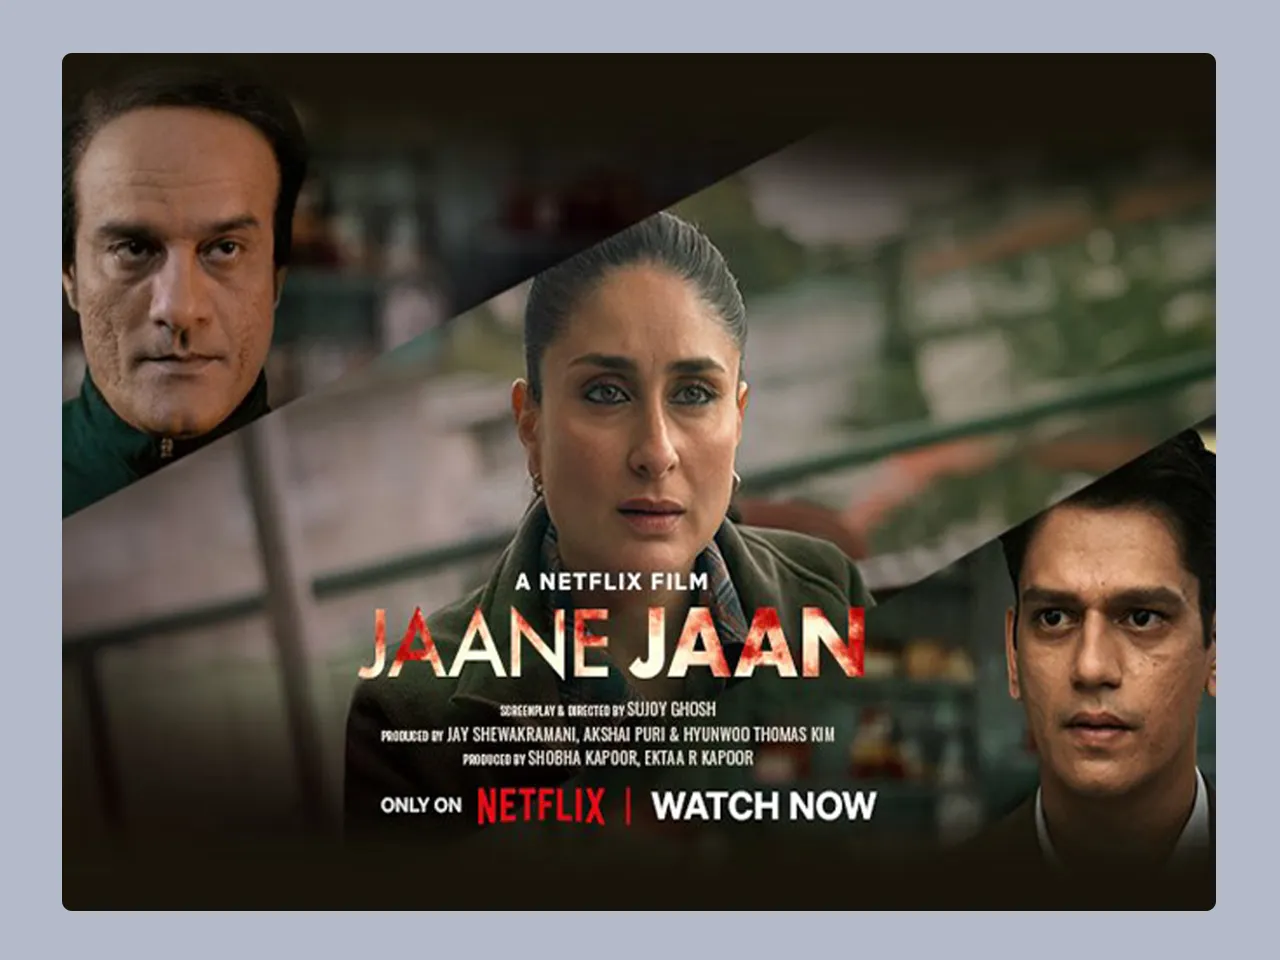 While Jaane Jaan marks Kareena Kapoor Khan's streaming debut, it's Jaideep Ahlawat's performance that stands out in this psychological thriller according to the Janta